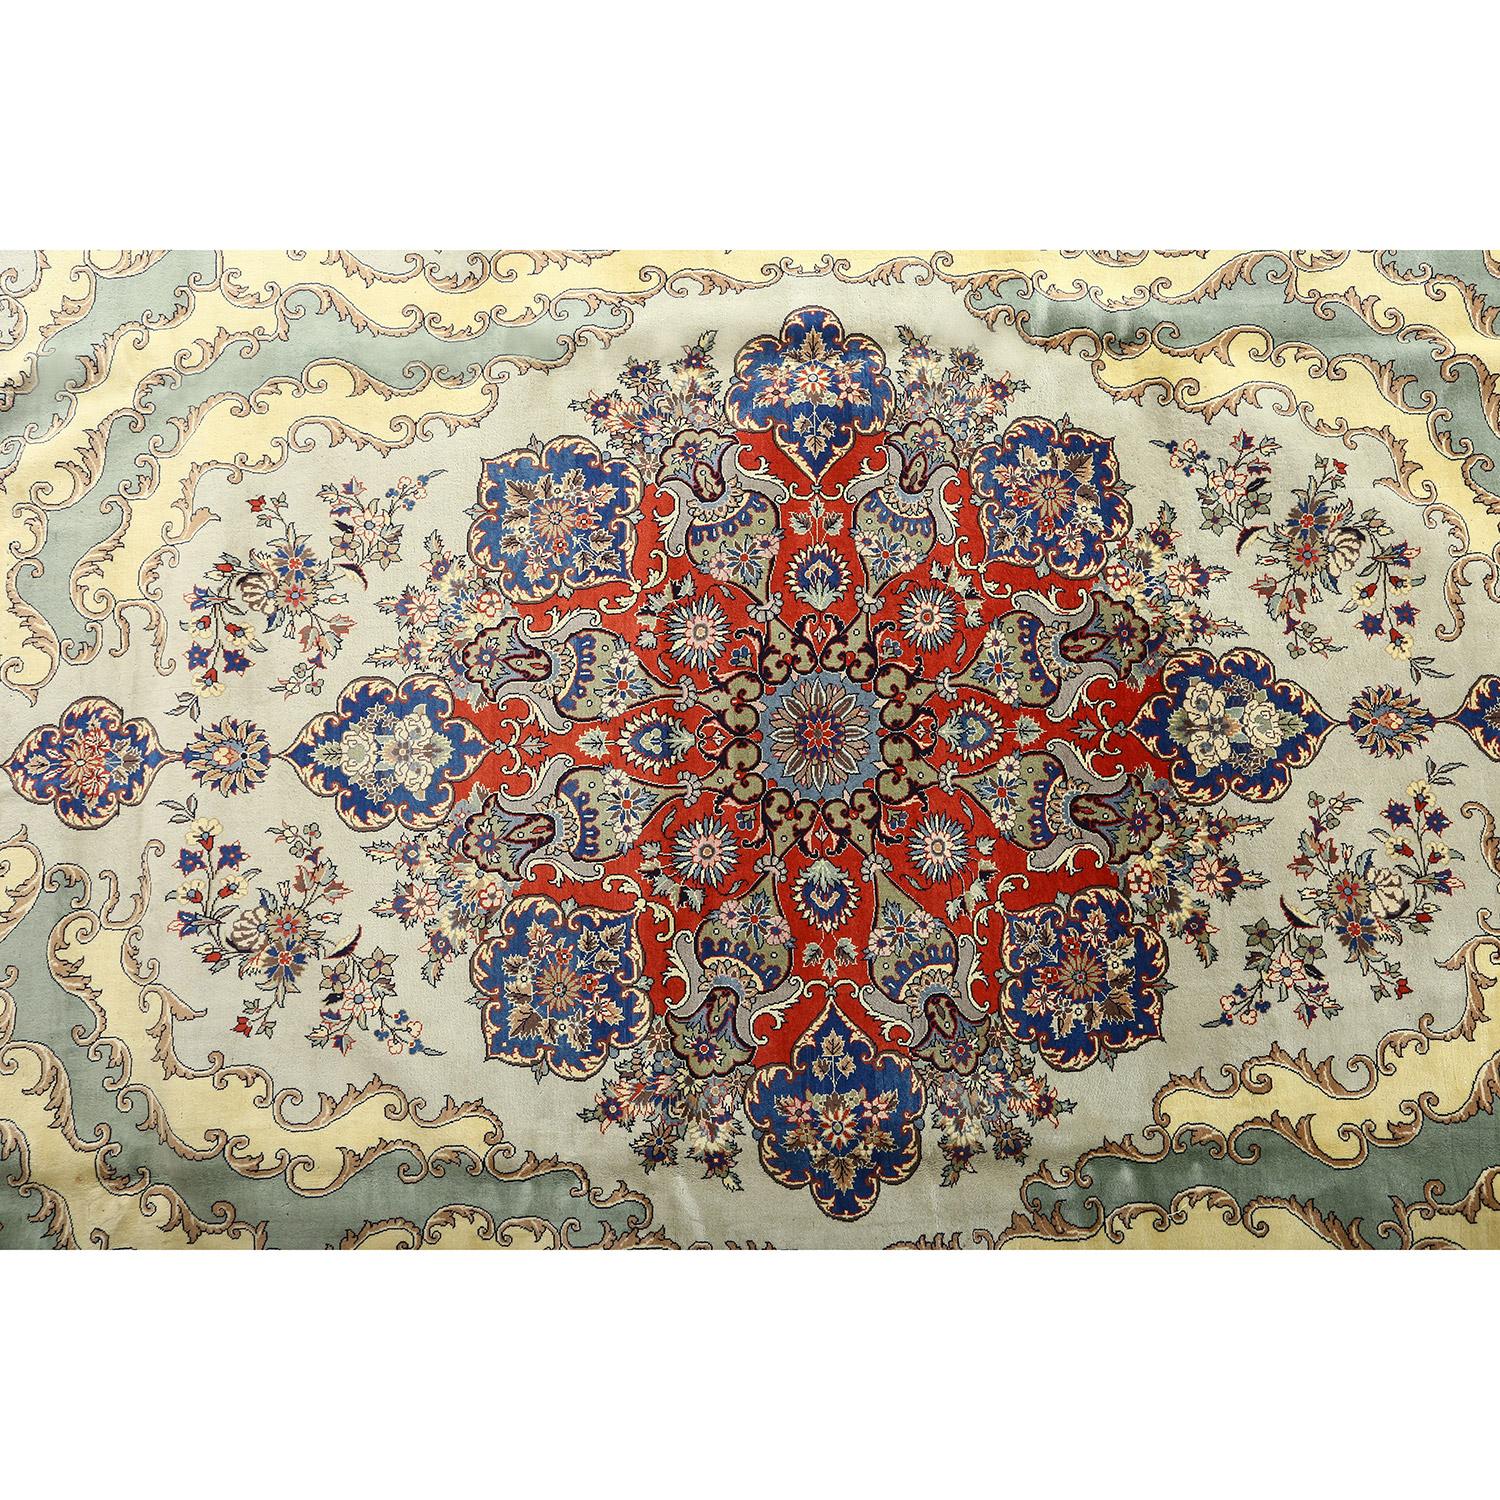 This vintage Qom Arsalani rug is a magnificent example of the artistry and craftsmanship that has made Qom rugs world-renowned. With its intricate patterns and exquisite design, it showcases the traditional weaving techniques and the rich history of